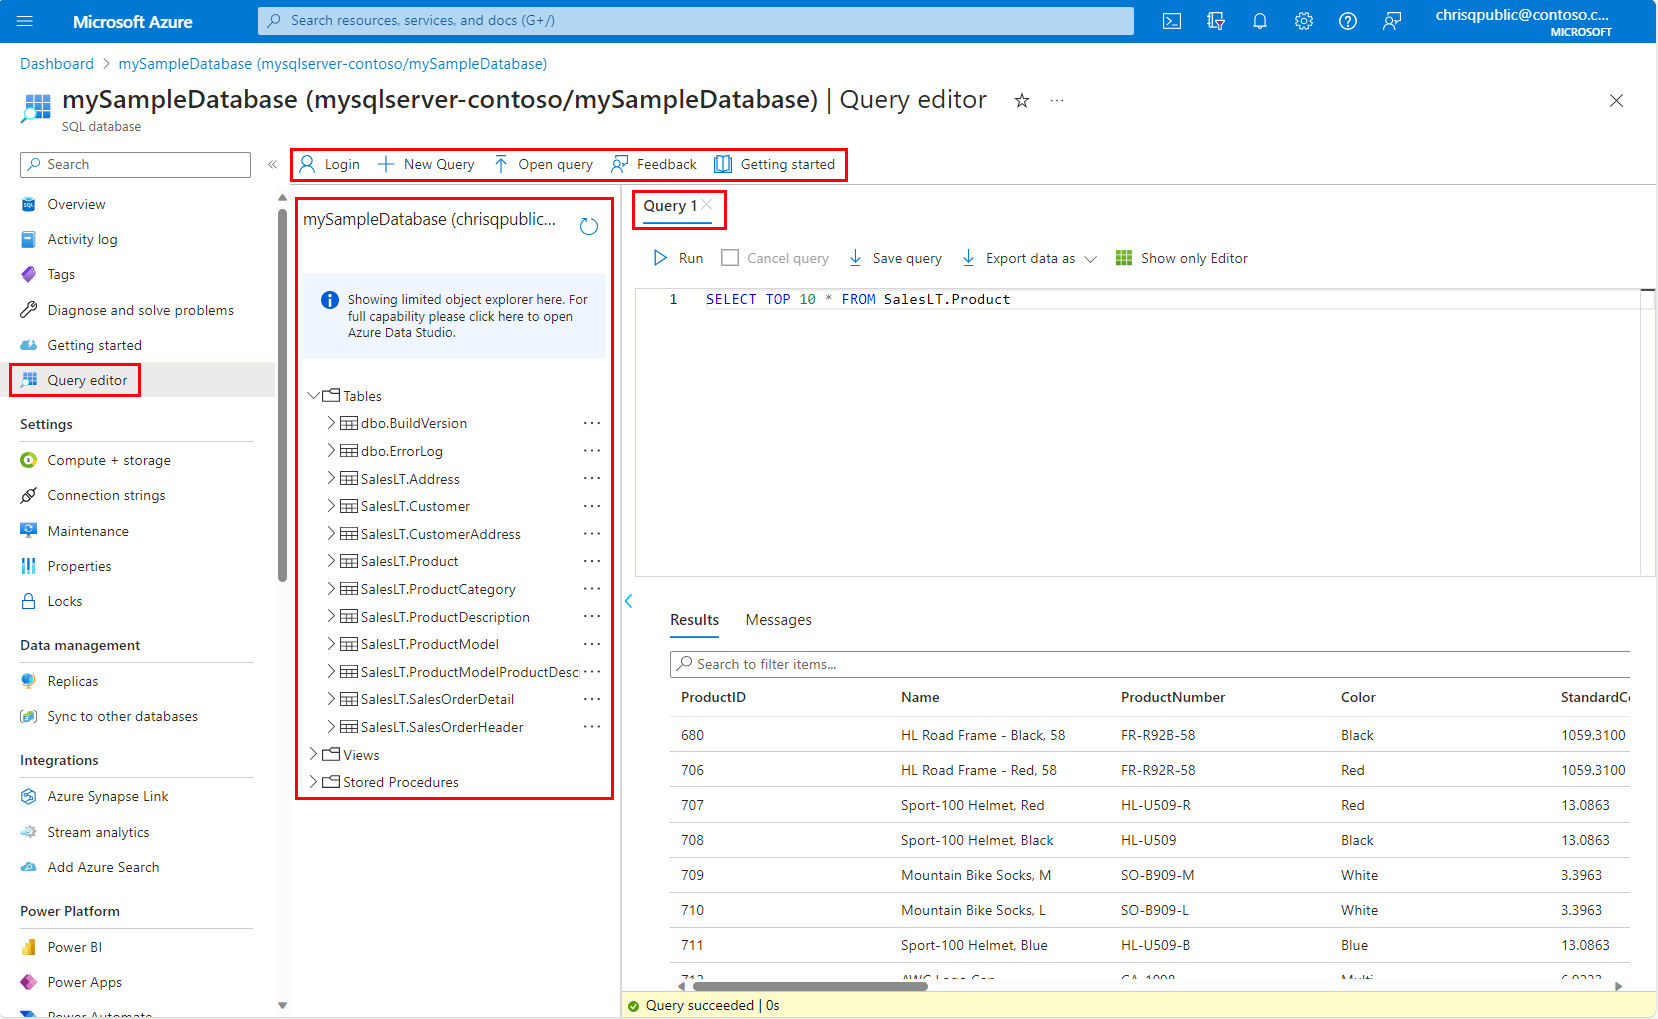 Screenshot from the Azure portal showing red rectangles highlighting the Query editor in the main menu and the Navigation bar, Object Explorer, and Query window.